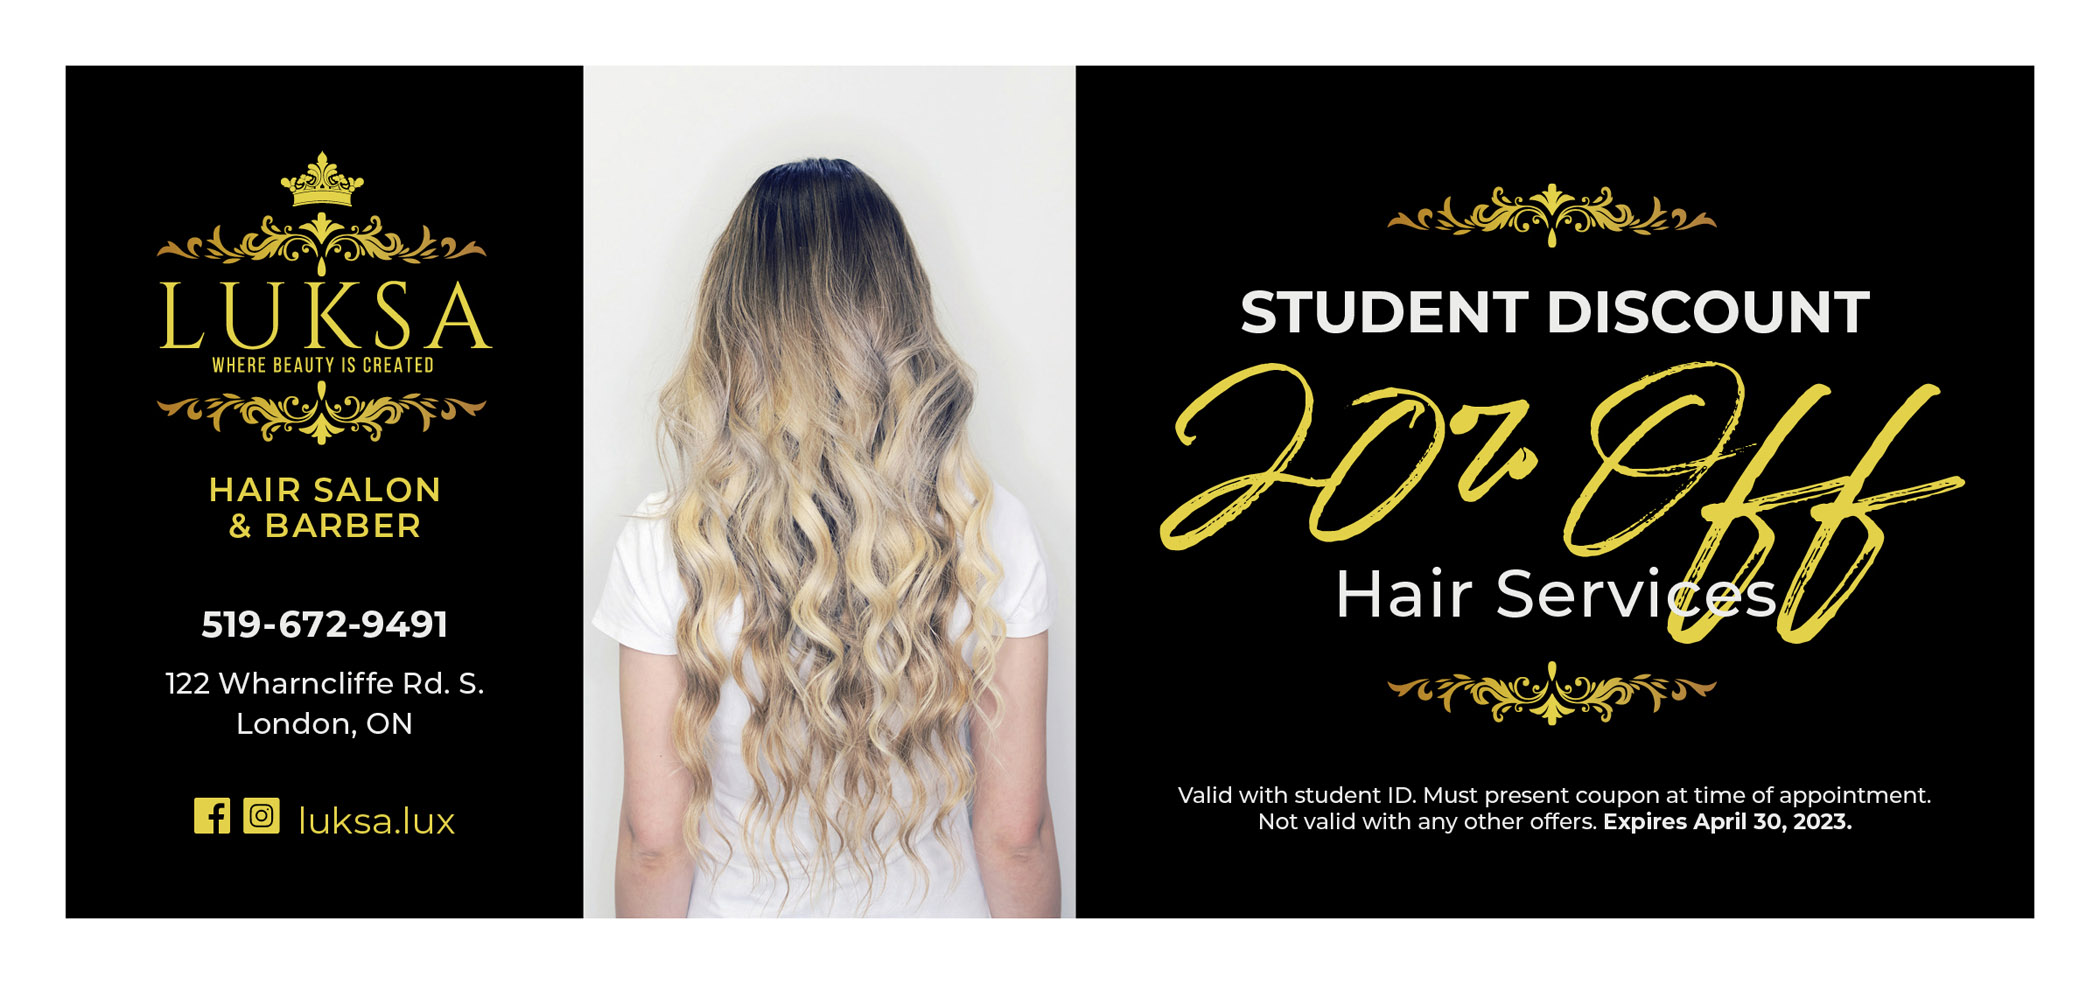 Student discount 20% off hair services